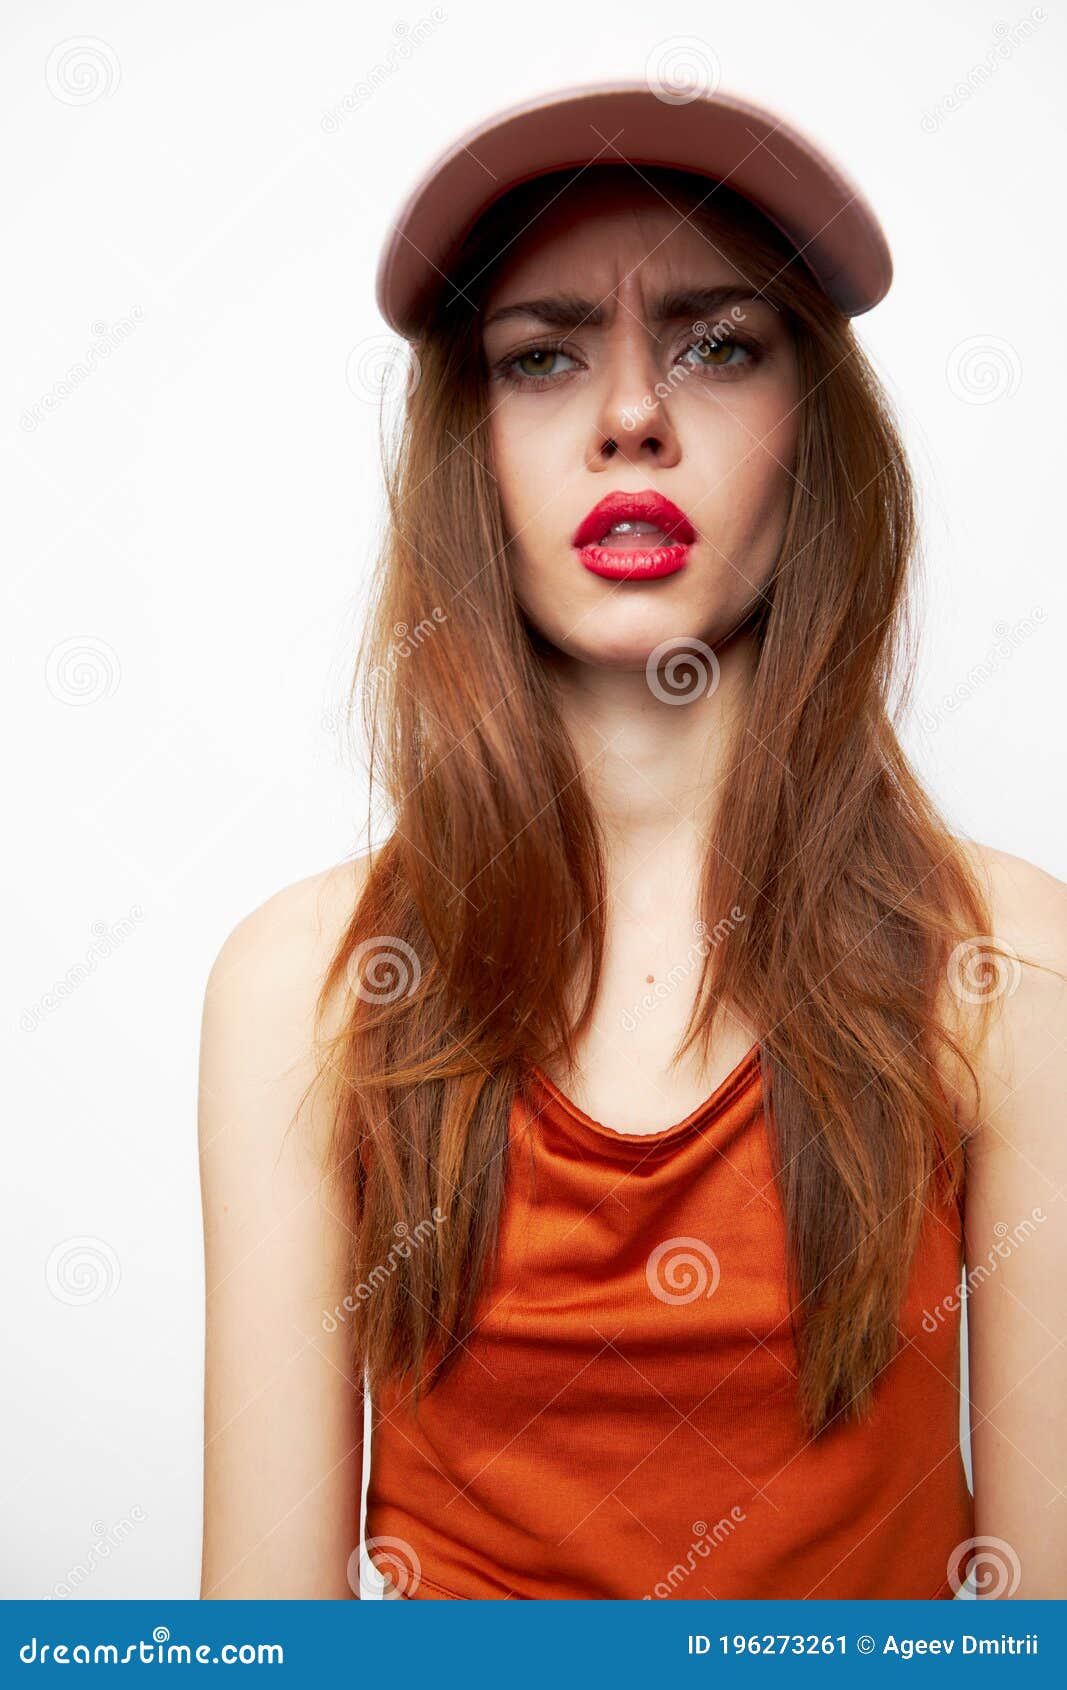 Emotional Woman in a Cap with an Open Mouth, a Daring Look Attractive ...